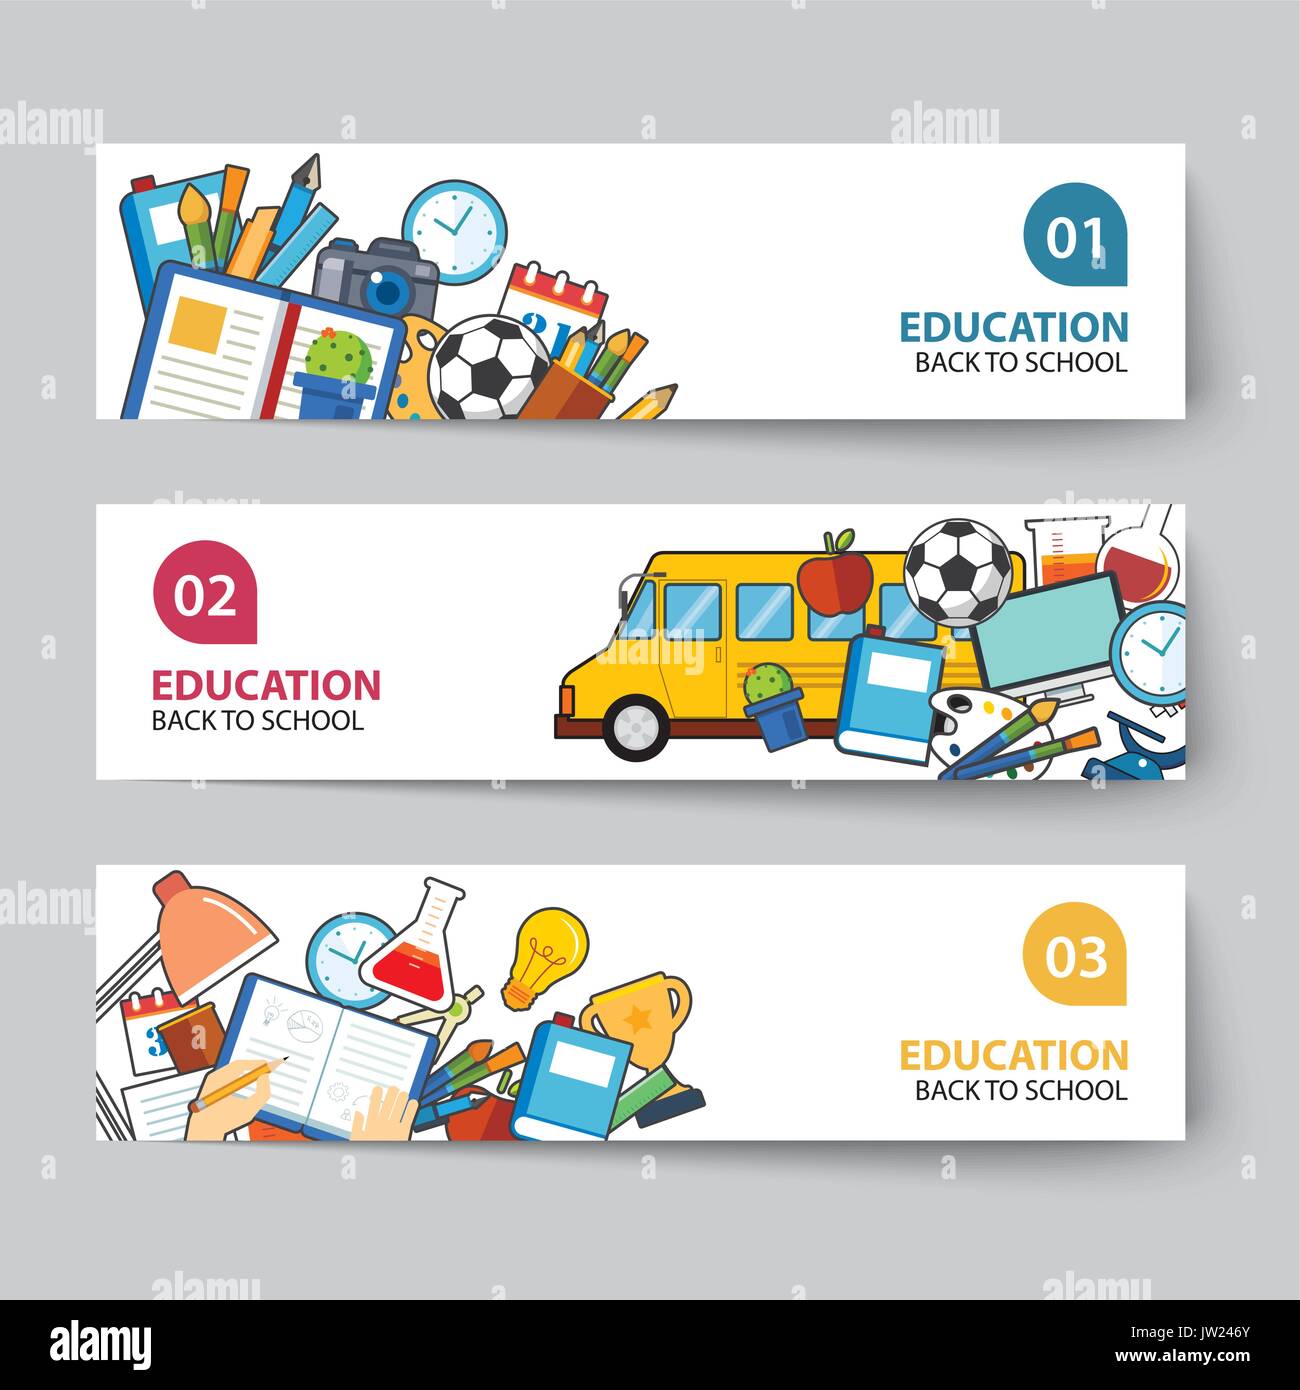 education and back to school banner concept flat design Stock Vector